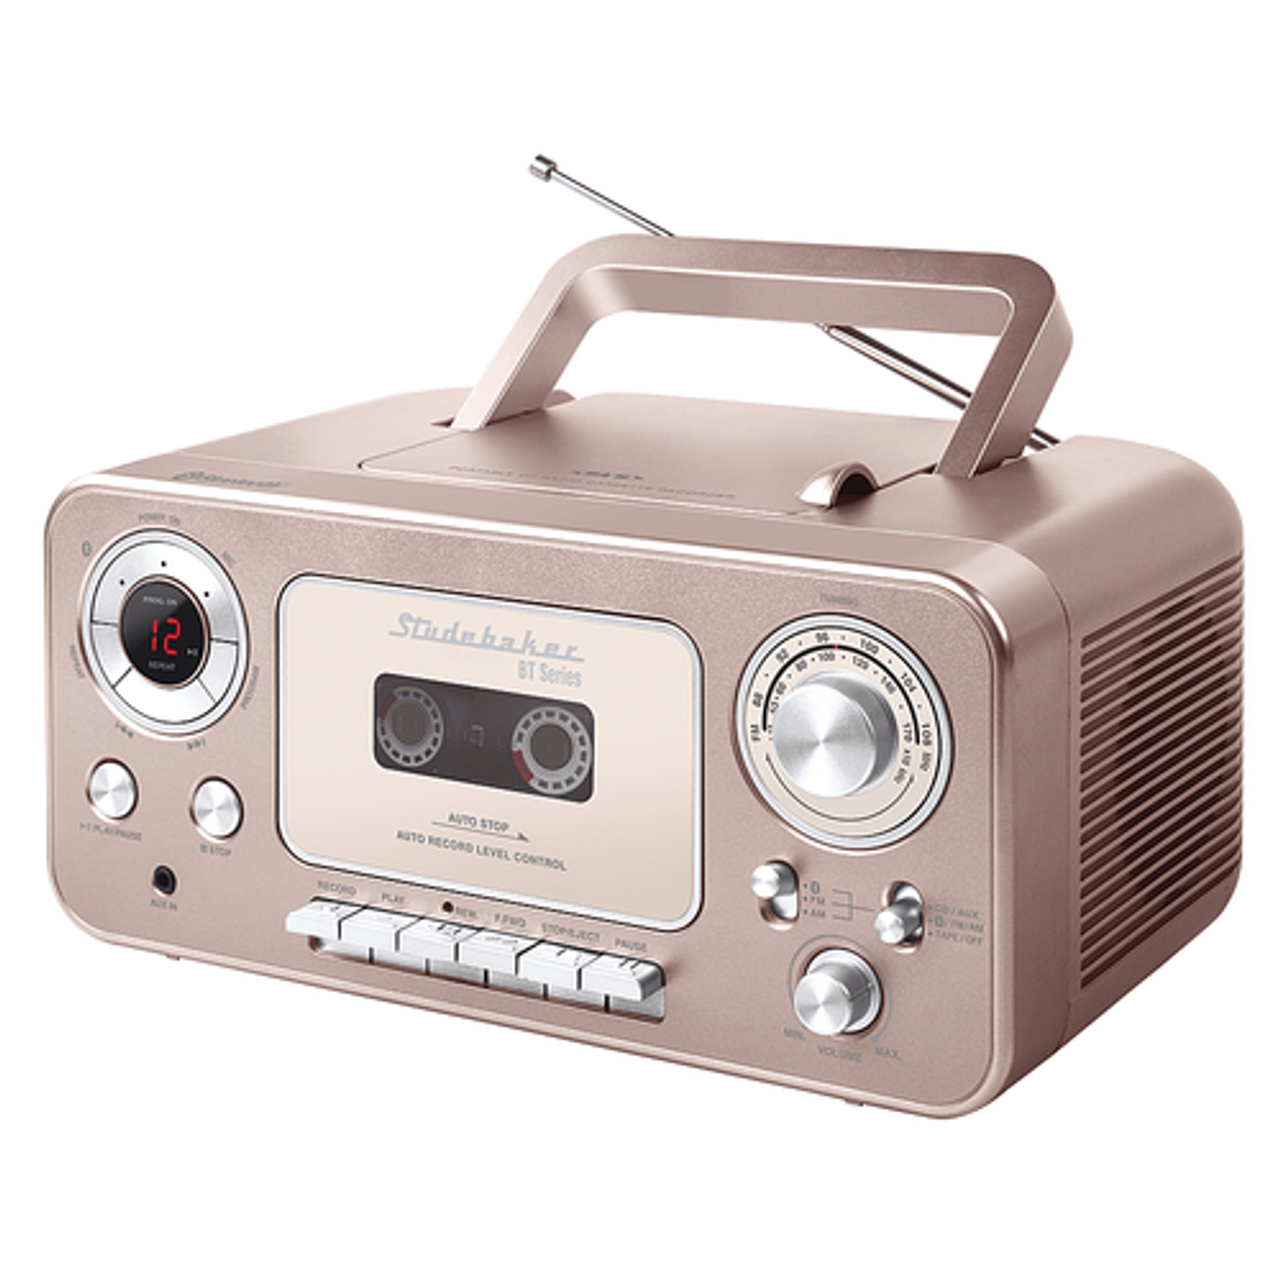 Studebaker - Portable Stereo CD Player with Bluetooth, AM/FM Stereo Radio and Cassette Player/Recorder - Rose Gold